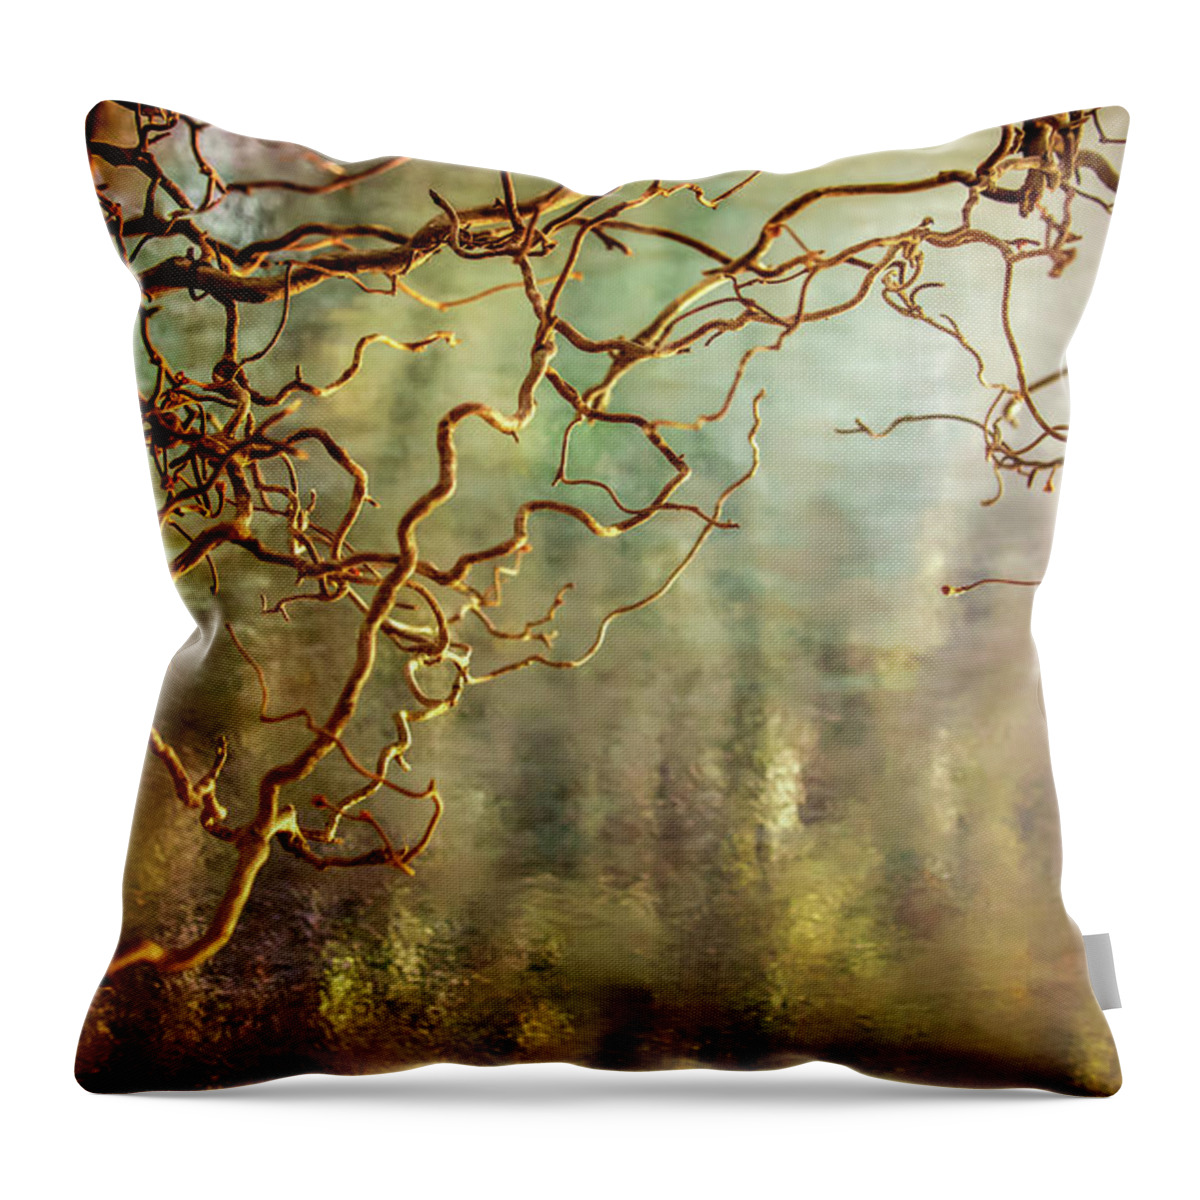 Water Reflections Throw Pillow featuring the photograph Calming Waters From Heaven by Karen Wiles